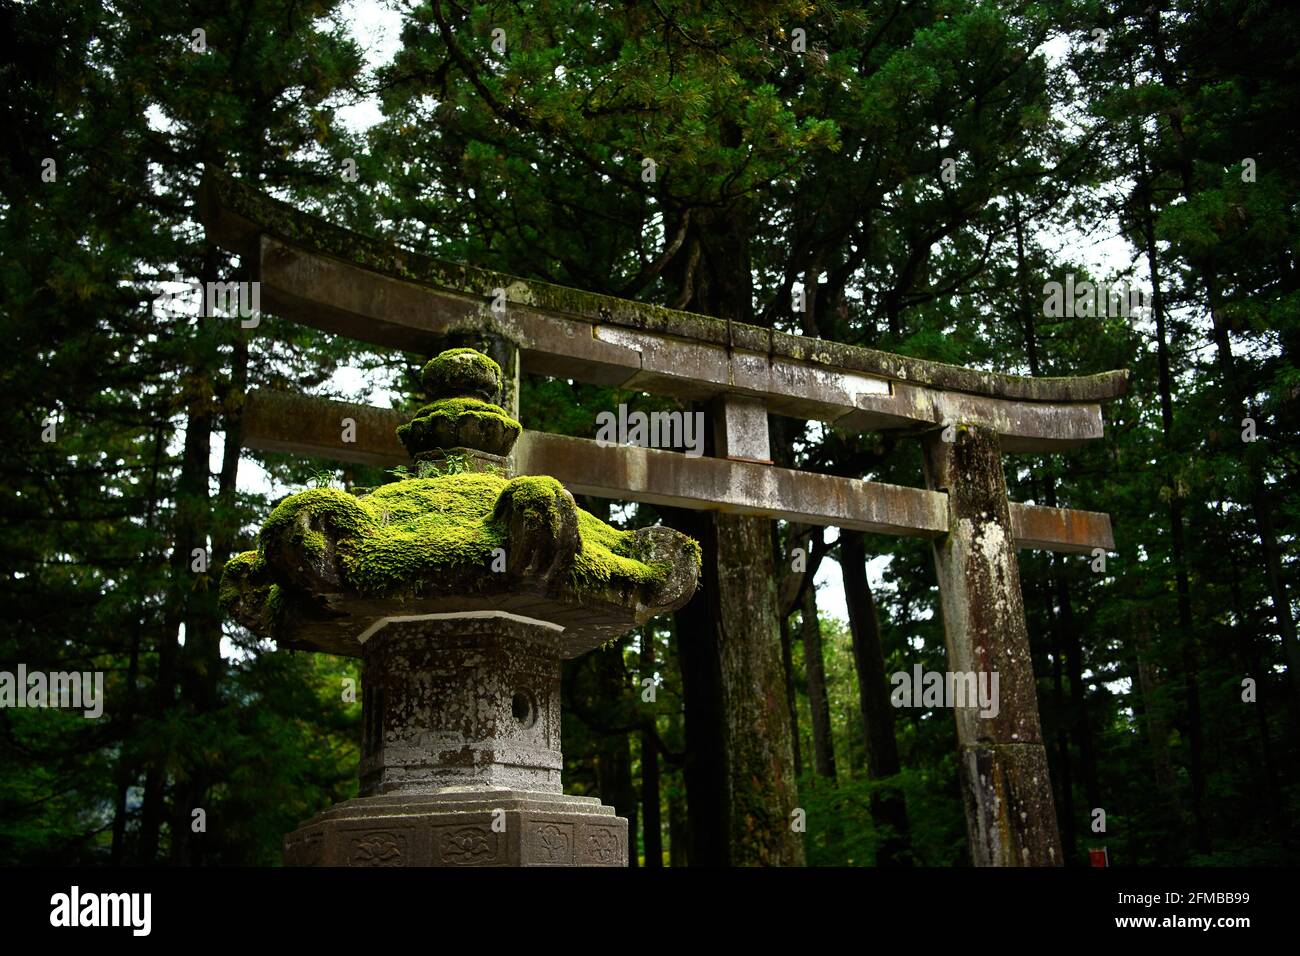 Japanese style stone lanterns are covered with green moss to make them look old and magical, the background is a Torii temple gates and trees in the s Stock Photo